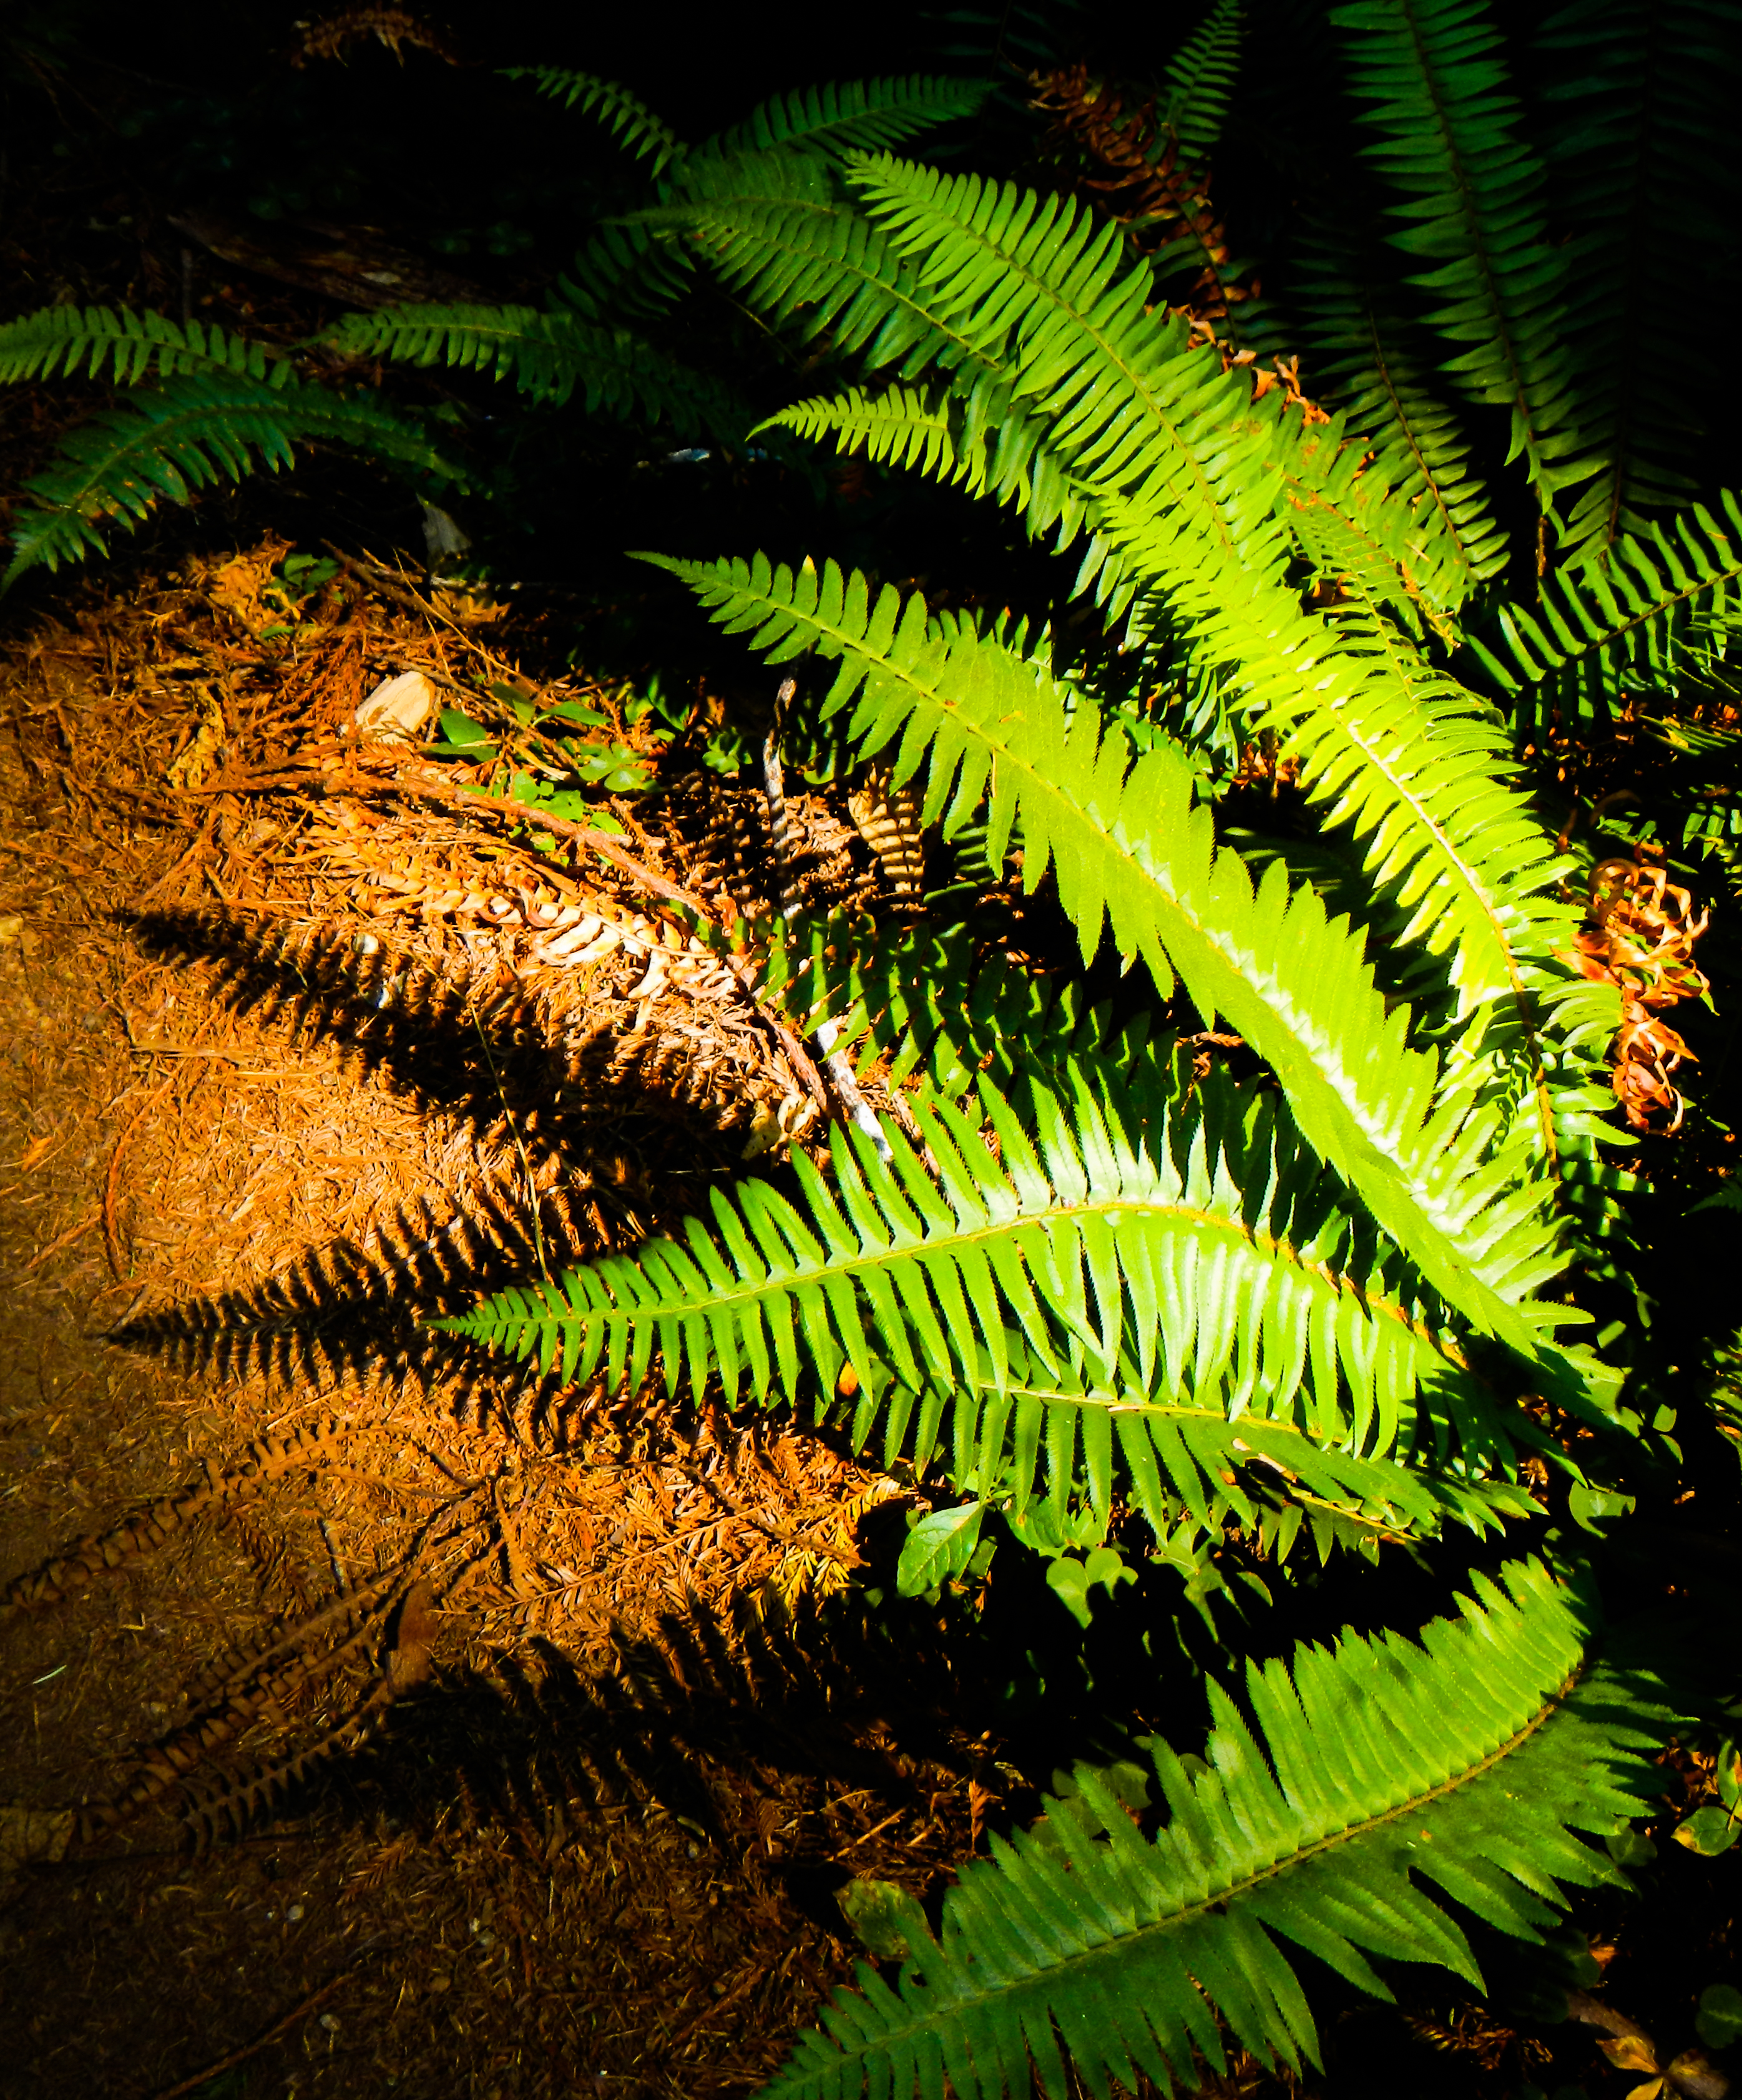 A sunlit fern casting a shadow of the redwood-forest floor.